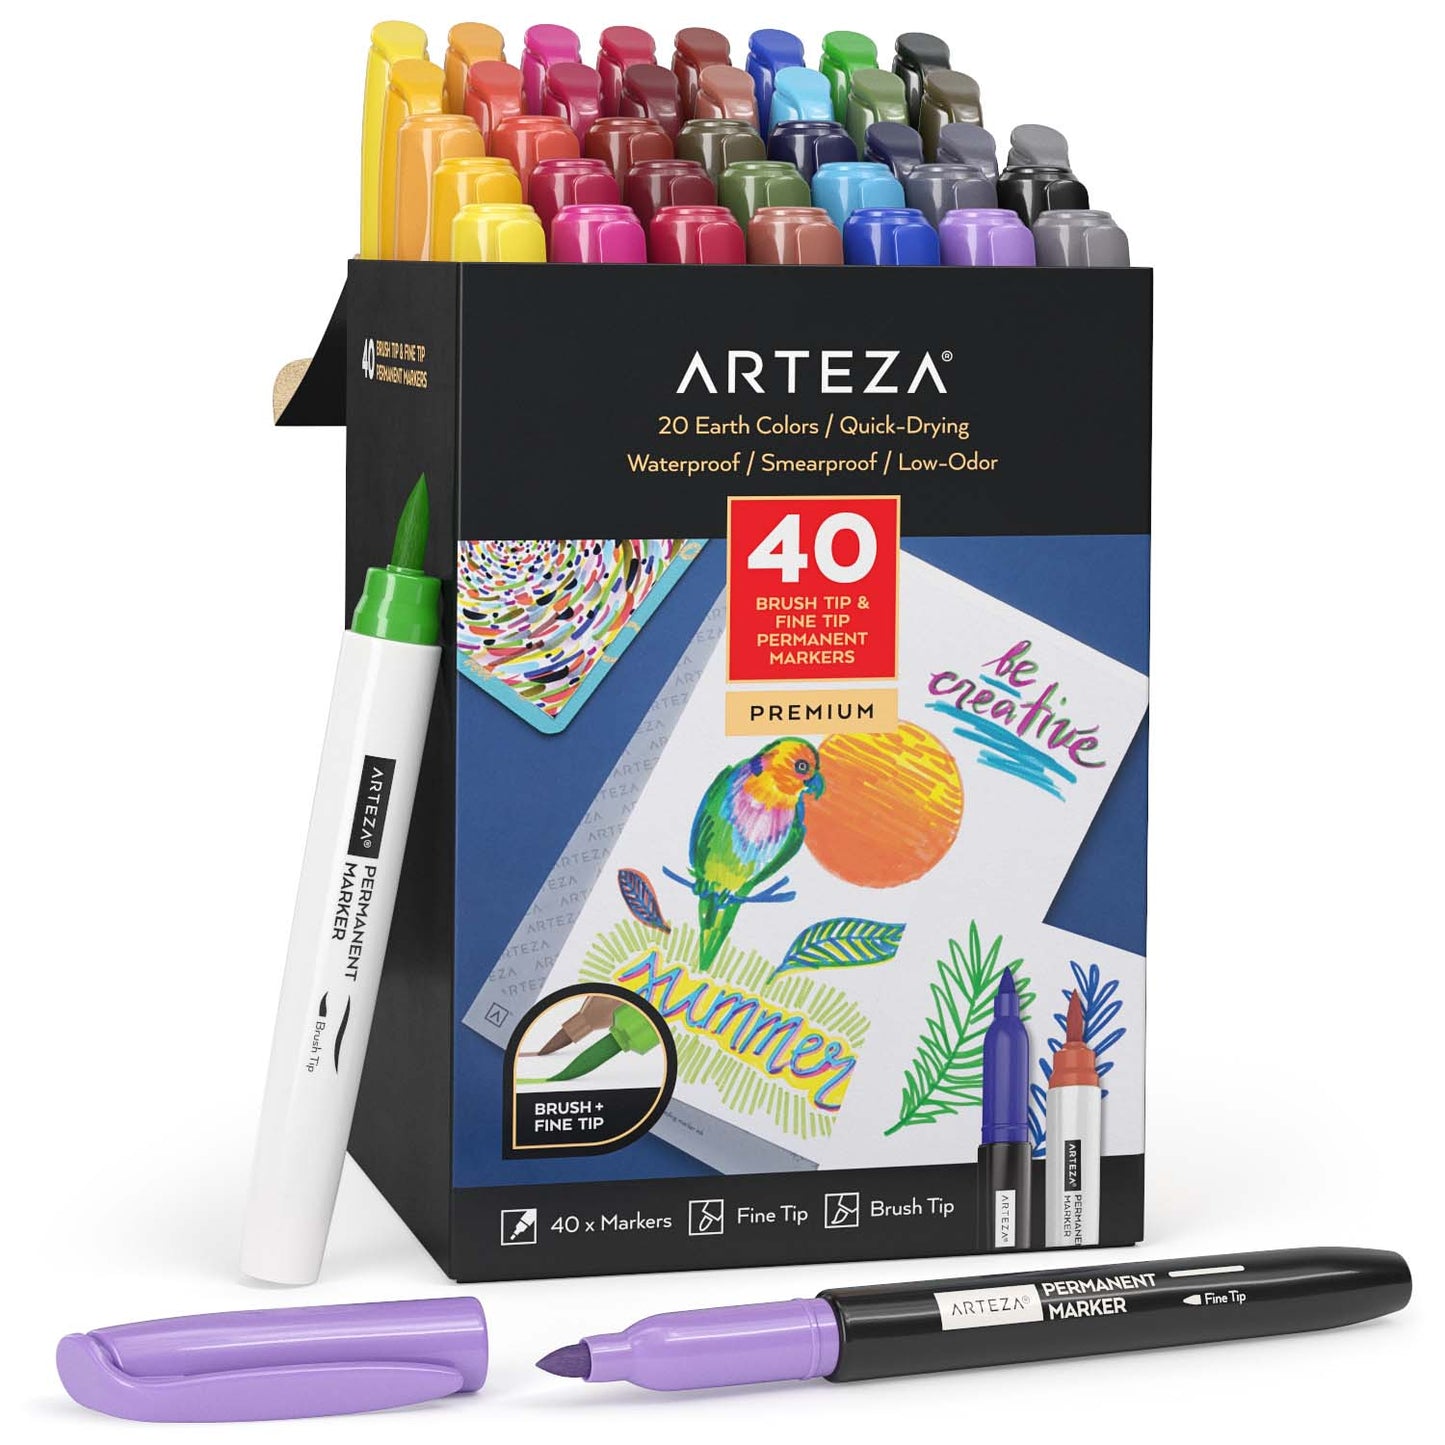 Acrylic Markers with a Brush Nib?! 